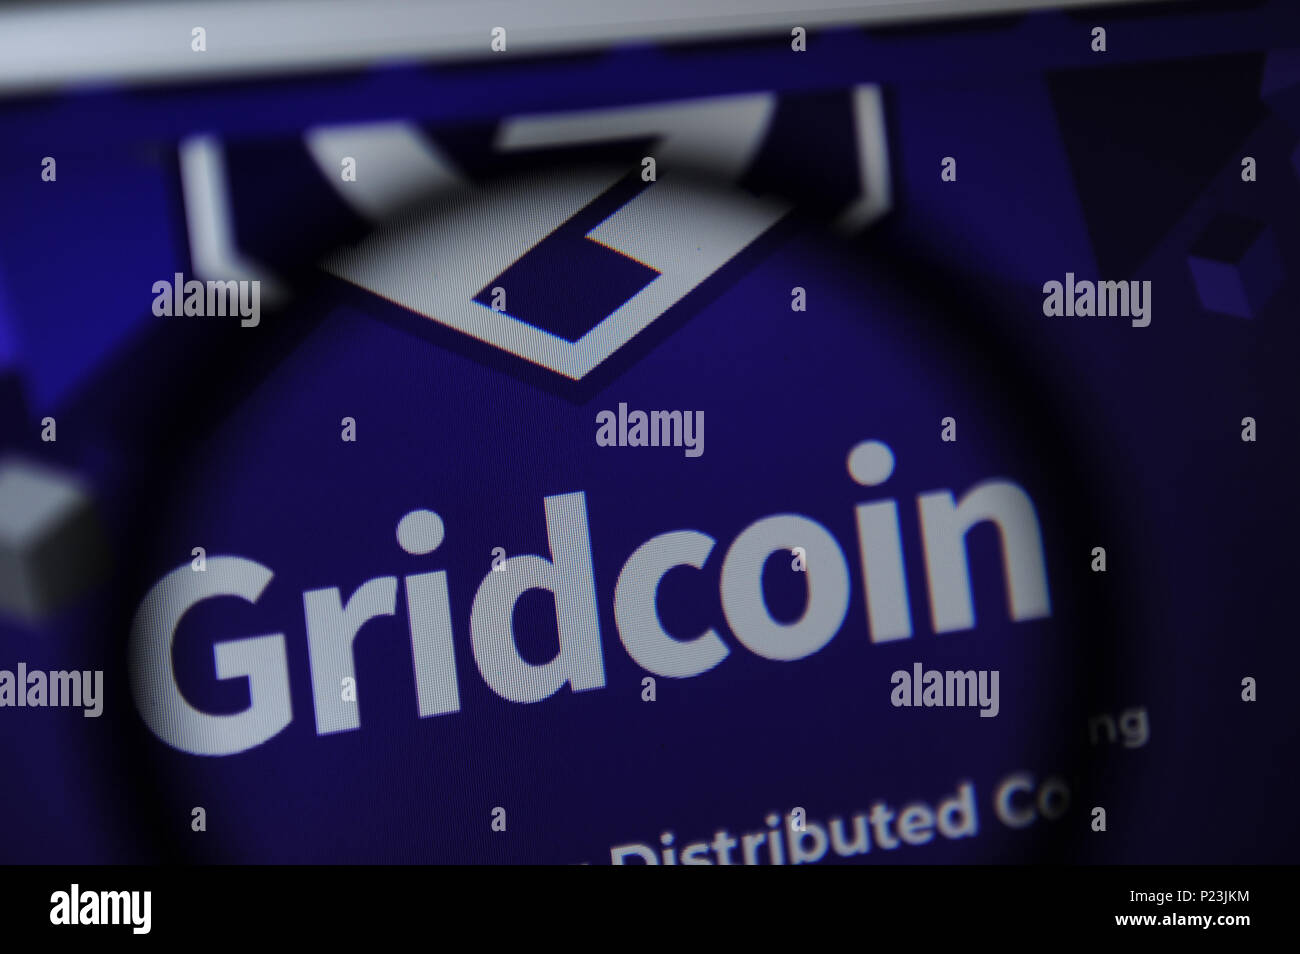 Die Gridcoin cryptocurrency Website Stockfoto